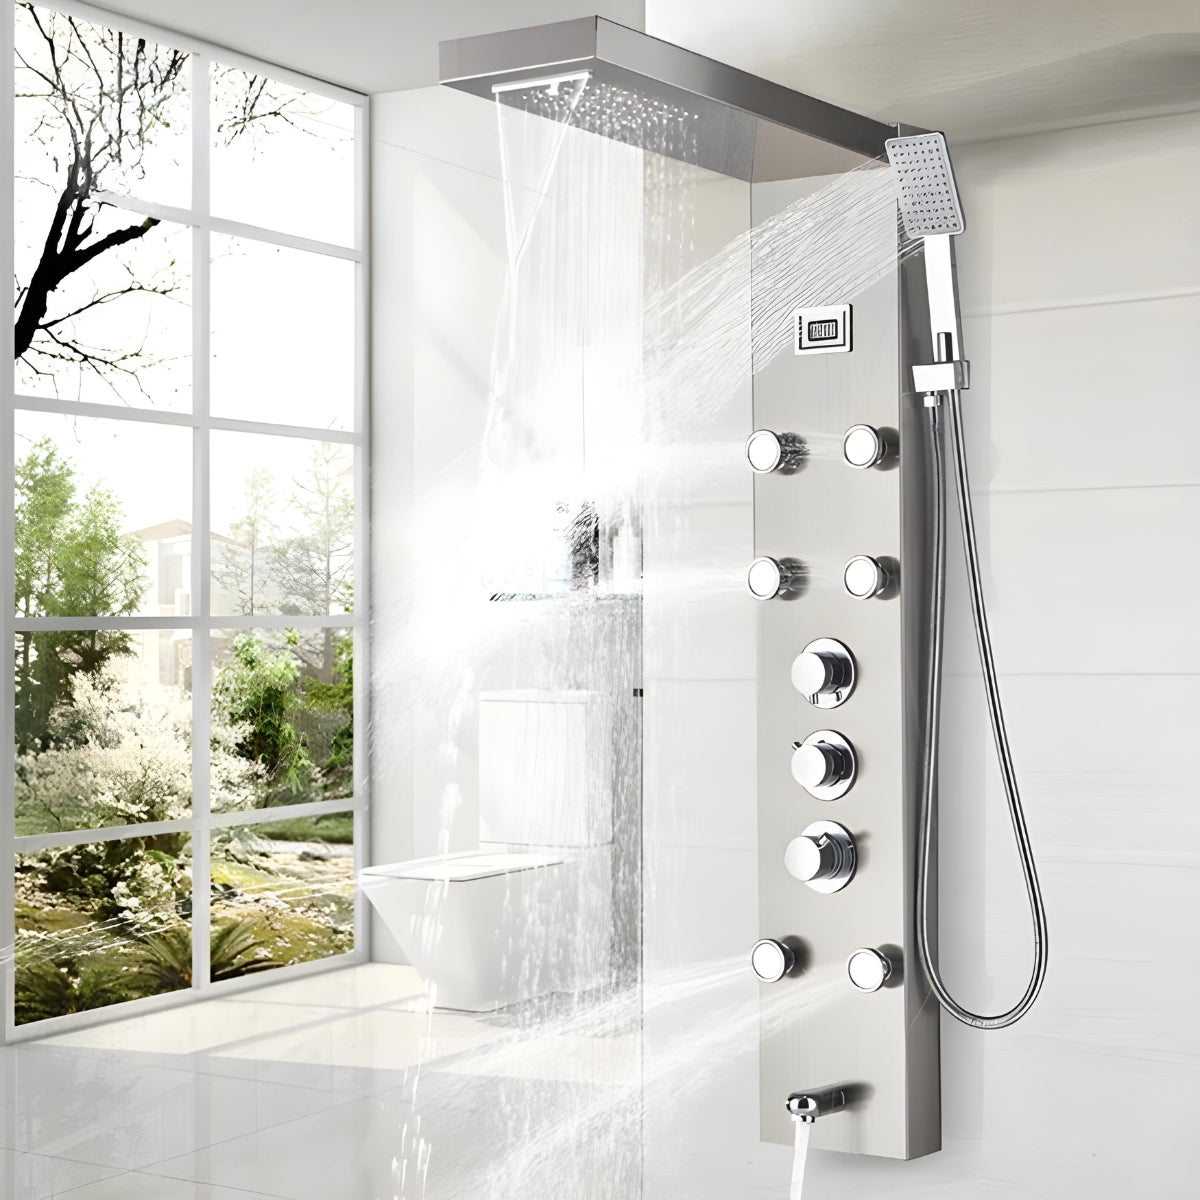 Stainless Steel Shower Panel Tower System,LED Shower Head 5-function Massage System with Body Jets